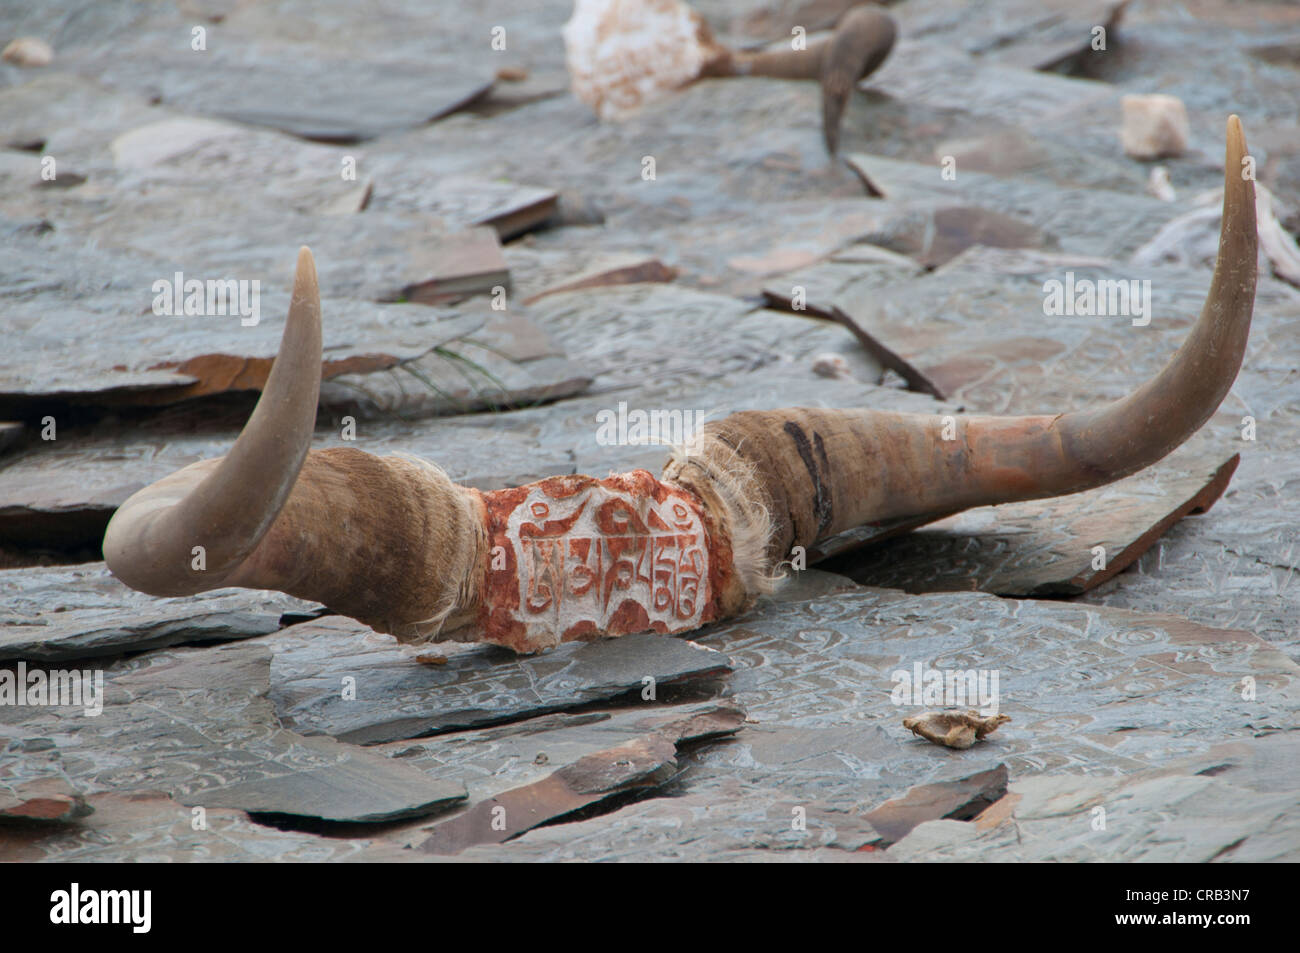 Slabs of slate with yak horns in the town of Tsochen, Western Tibet, Tibet, Asia Stock Photo